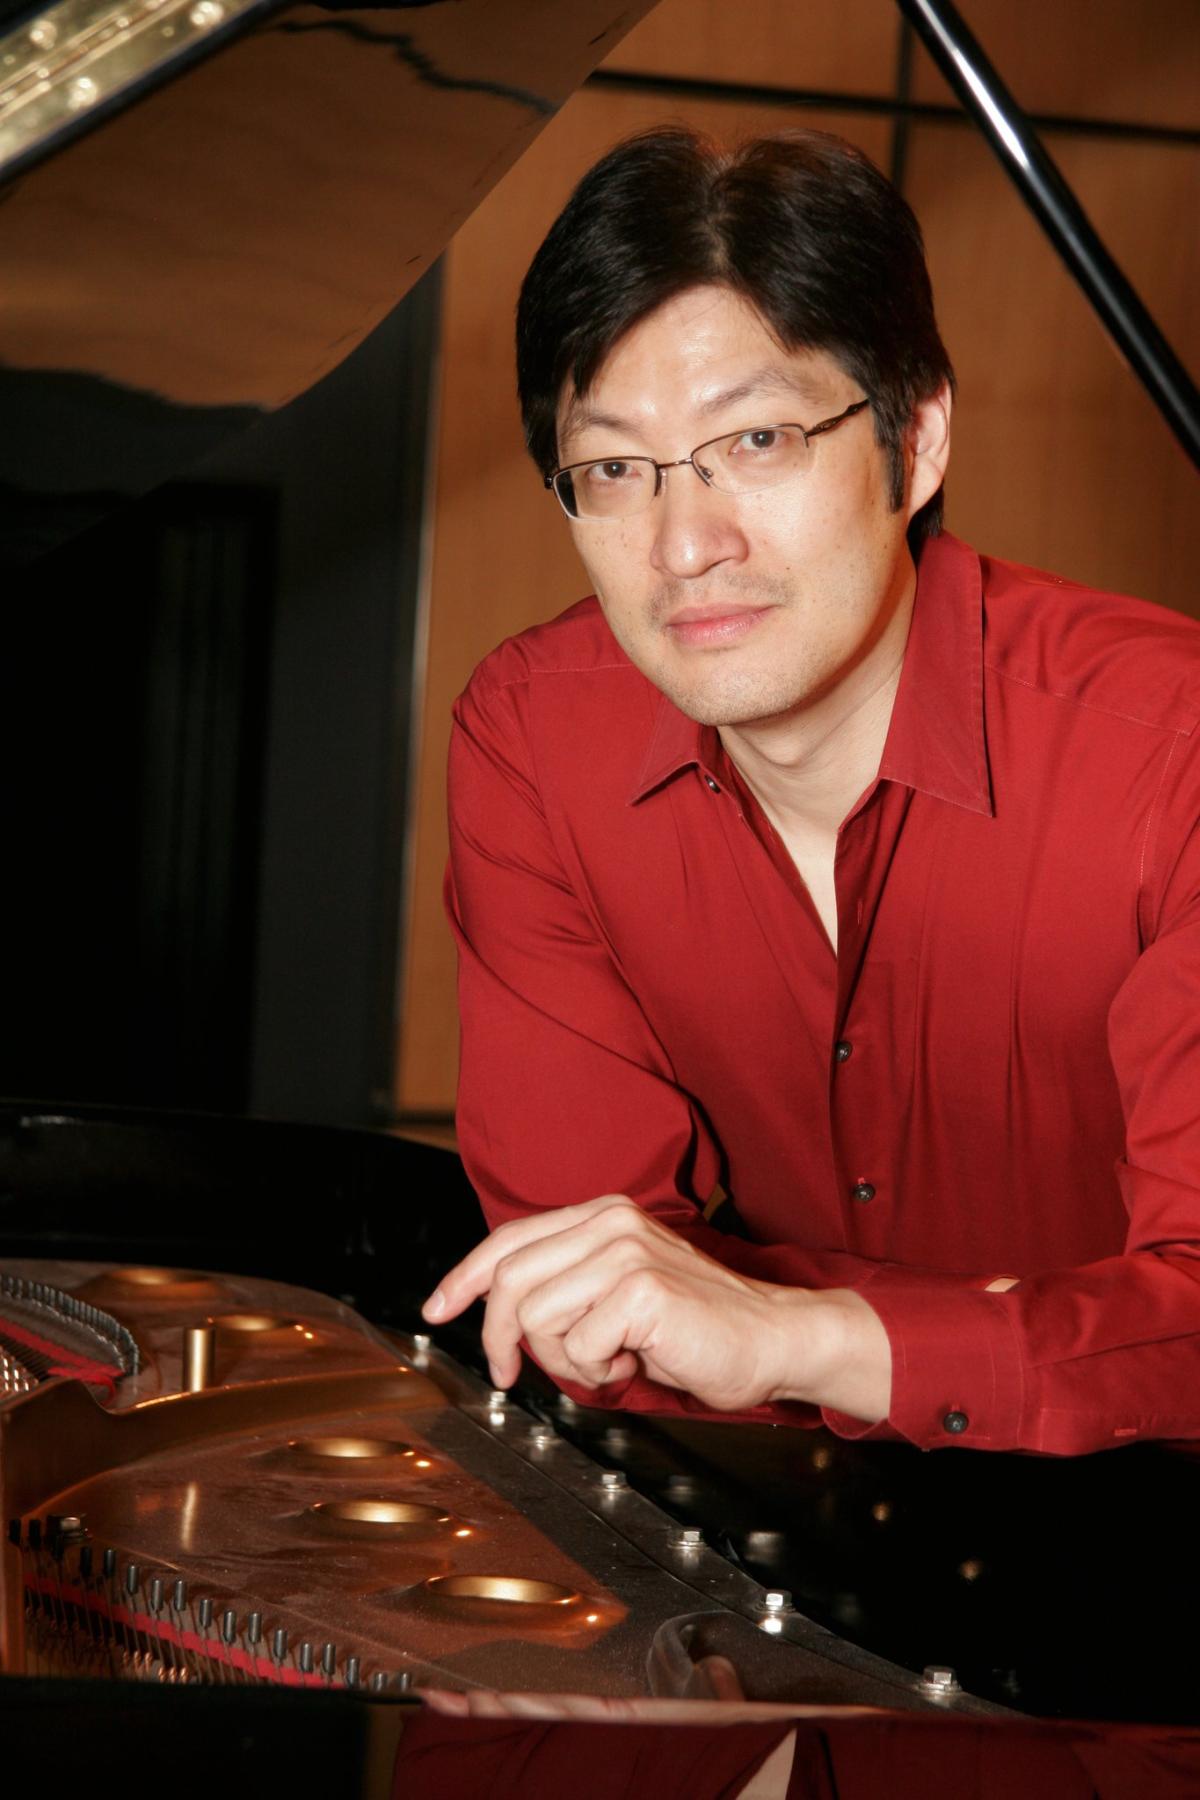 A color photo of pianist Alex Wu in a red shirt and leaning on a piano.